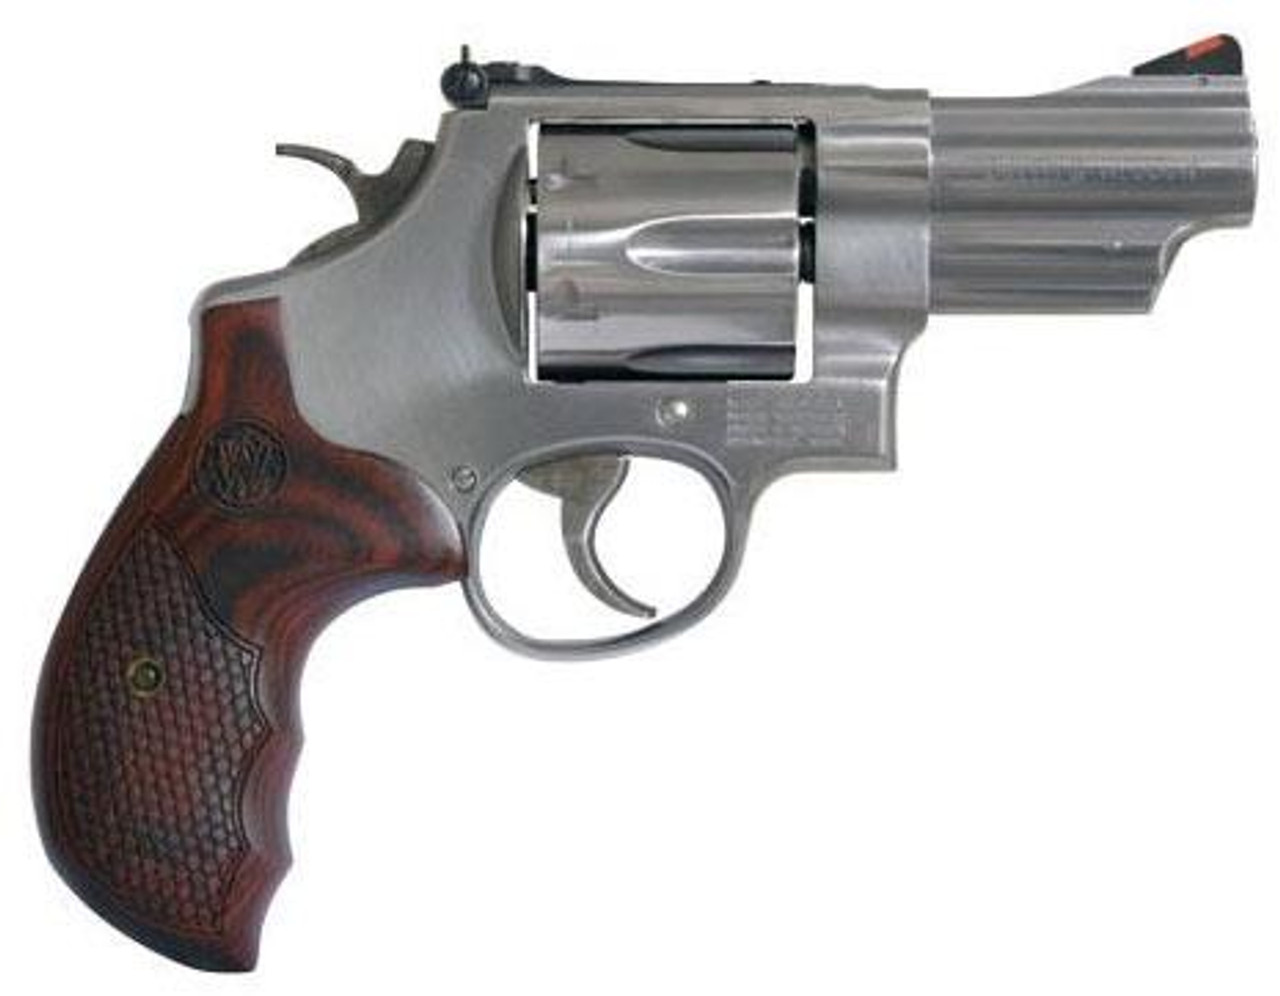 Smith & Wesson 629 Deluxe 44 Magnum | 44 Special #150715